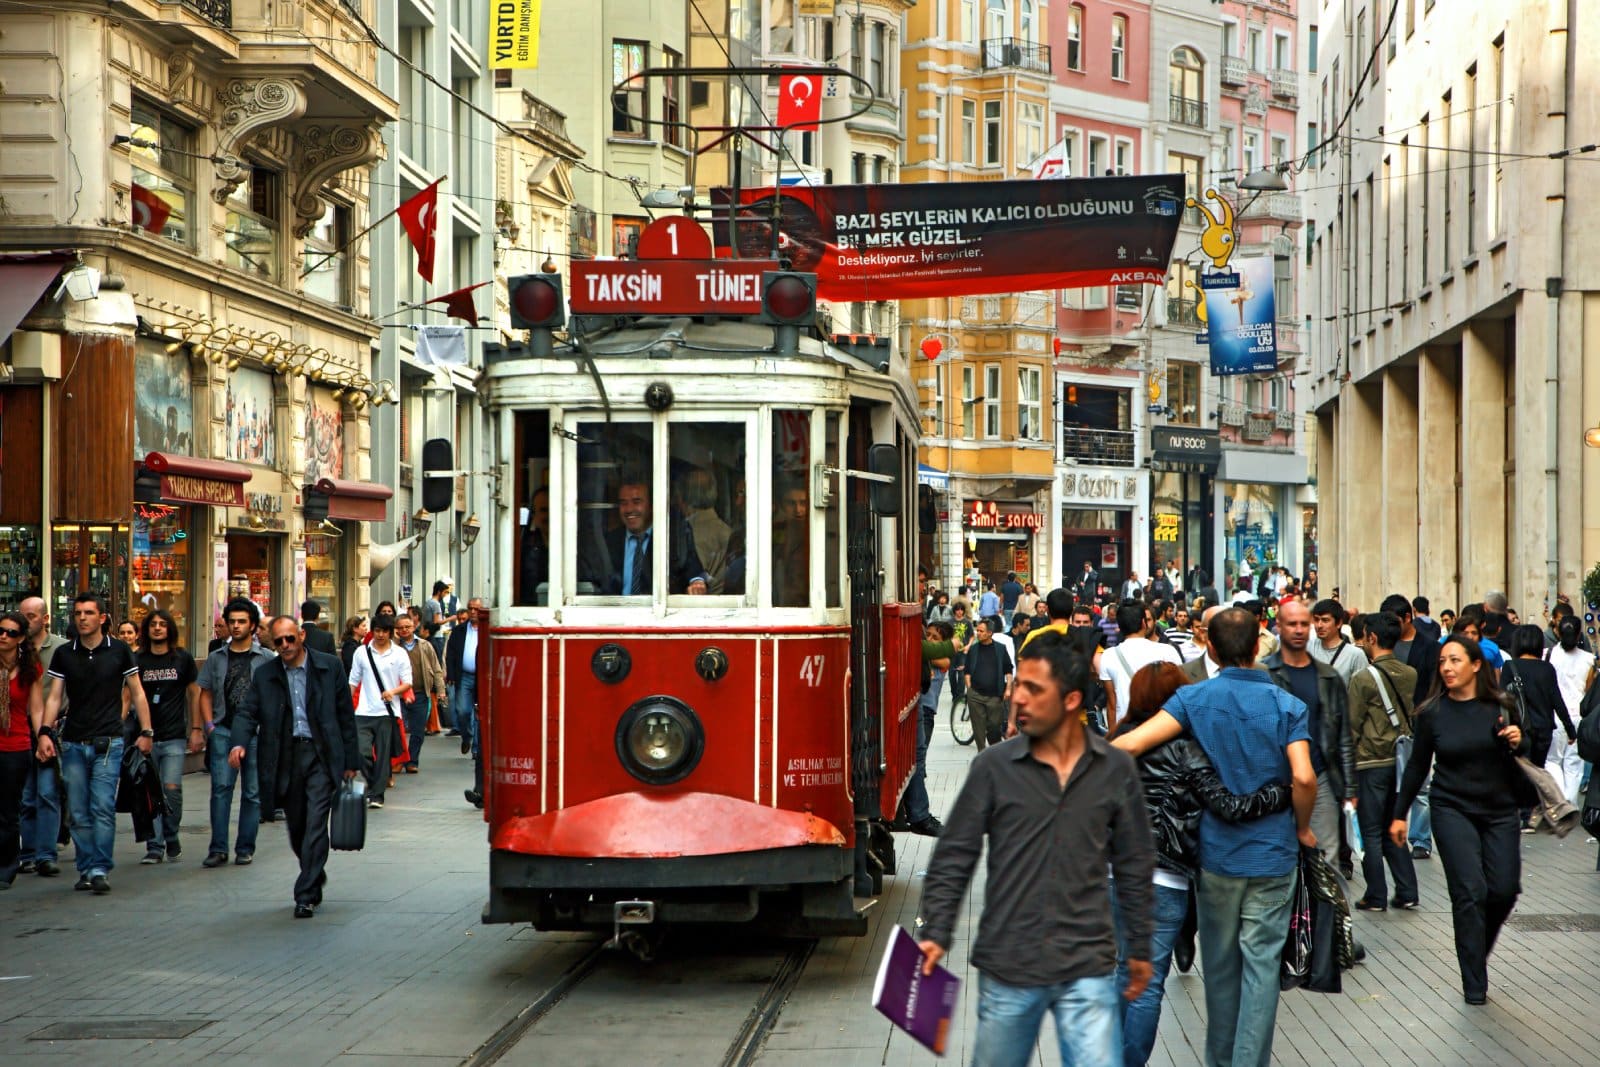 <p><span>With amazing historical and cultural sights and an incredibly low cost of living due to high rates of inflation, people around the world flock to Turkey for work and travel. </span></p>